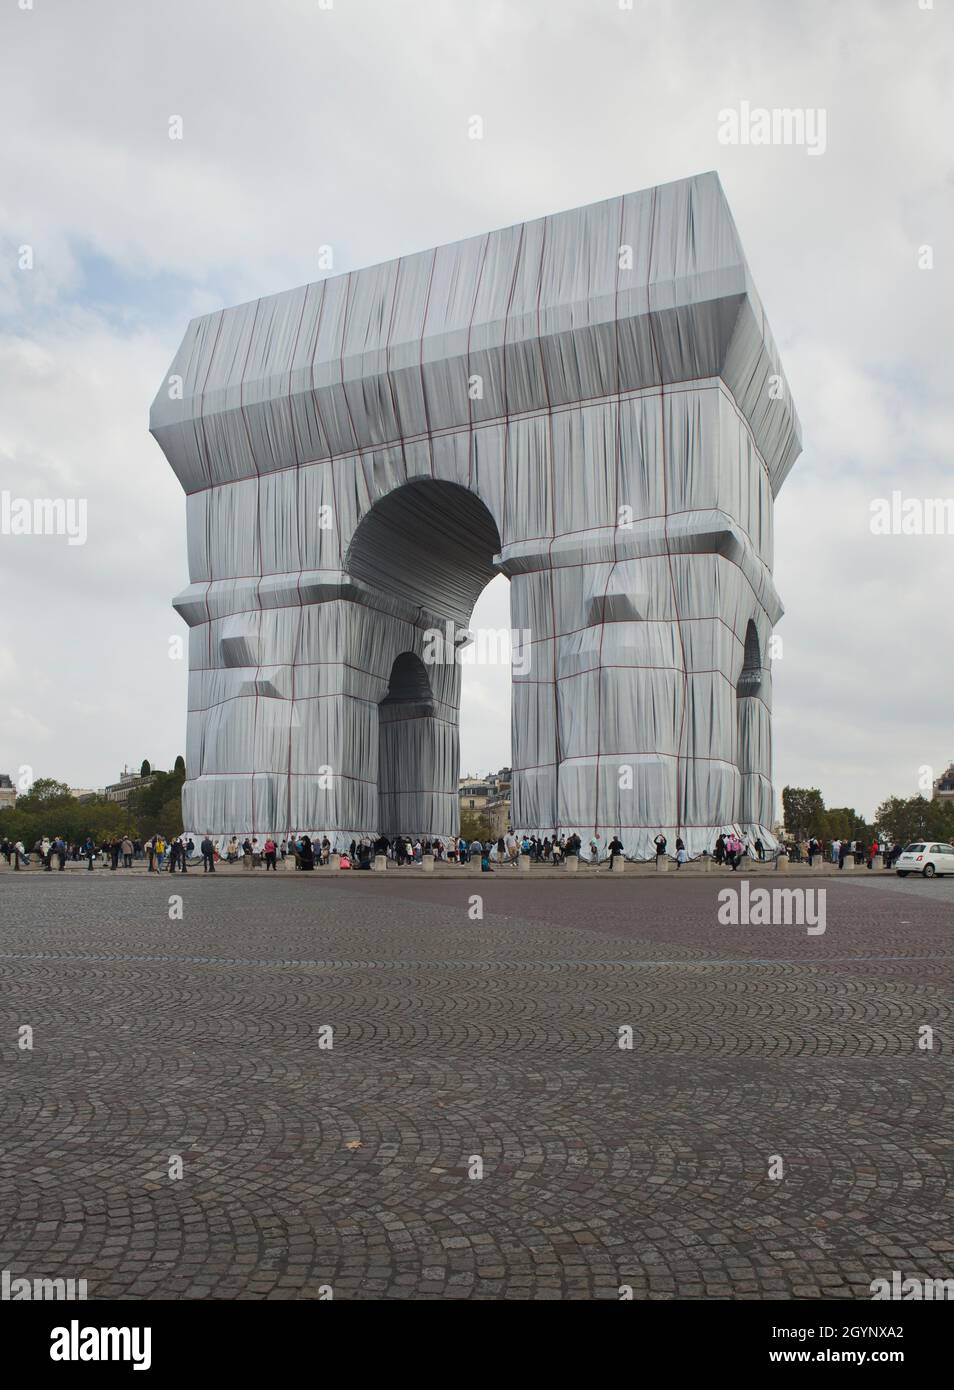 The Arc de Triomphe wrapped in silver-blue fabric fastened with red ropes in the Place Charles de Gaulle in Paris, France. The Arc de Triomphe was wrapped for two weeks being converted to an artwork as it was designed by Christo and Jeanne-Claude in September 2021. Stock Photo